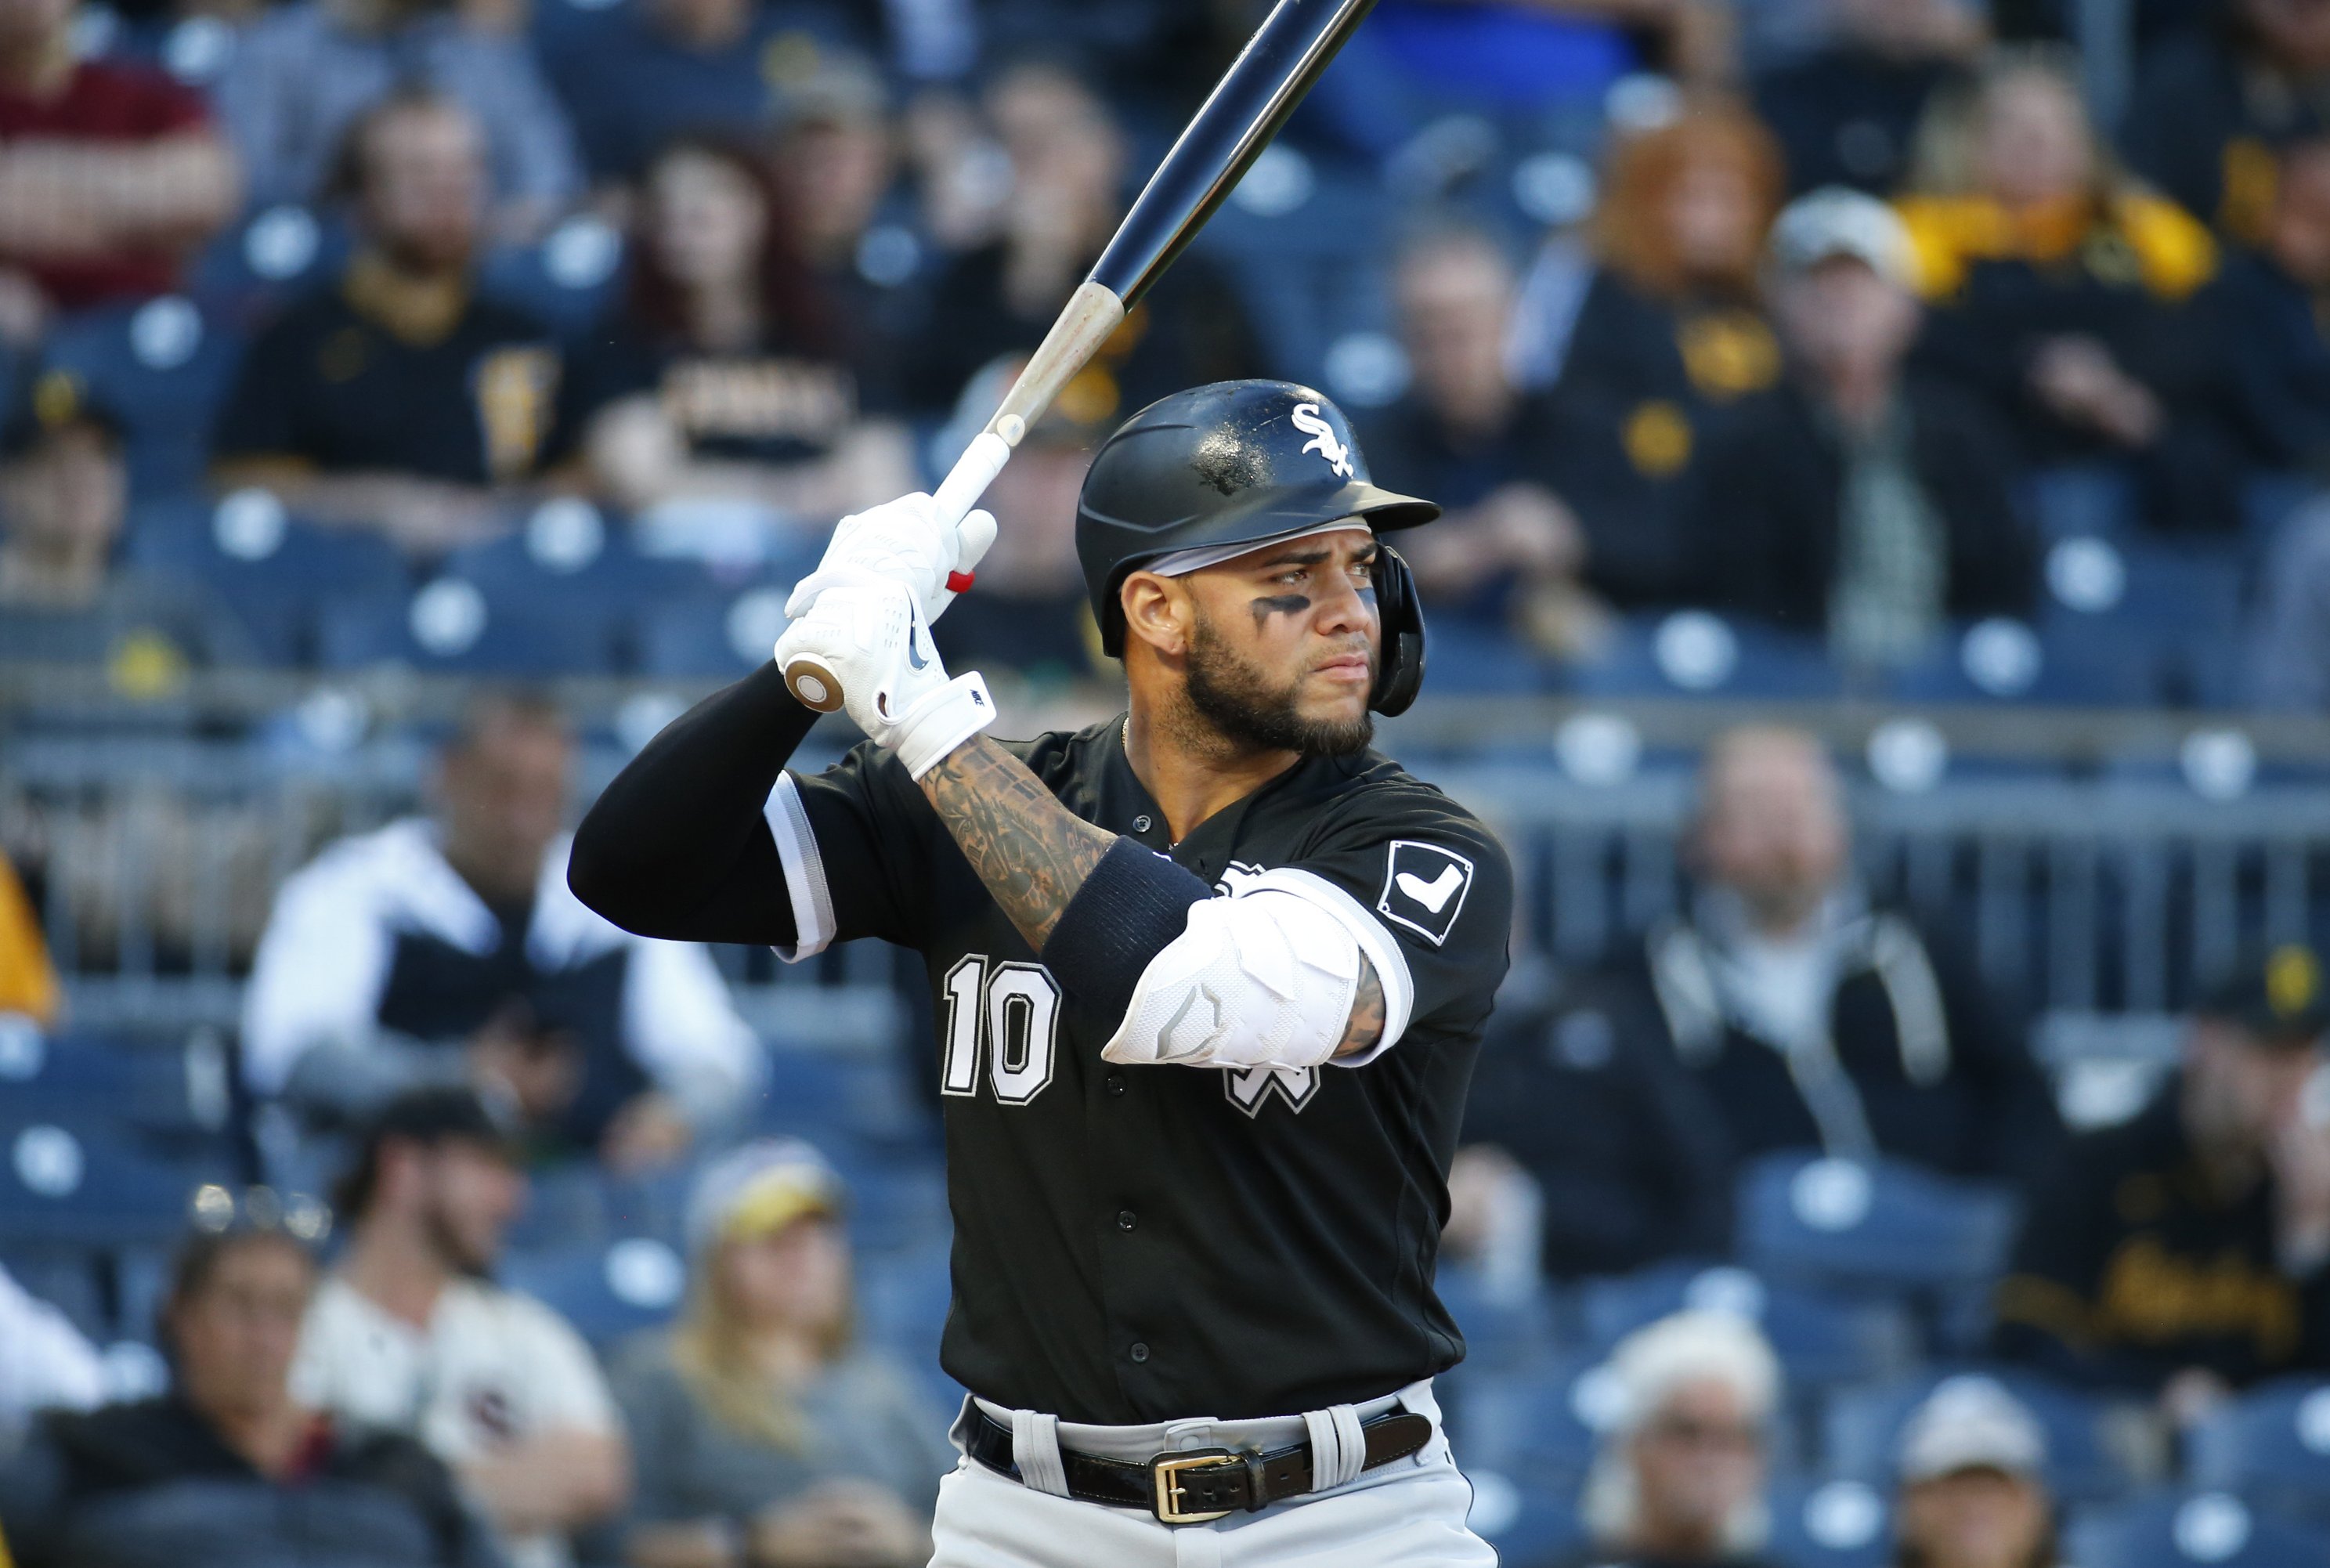 If White Sox hope to get it turned around in 2024, Moncada must be healthy,  productive